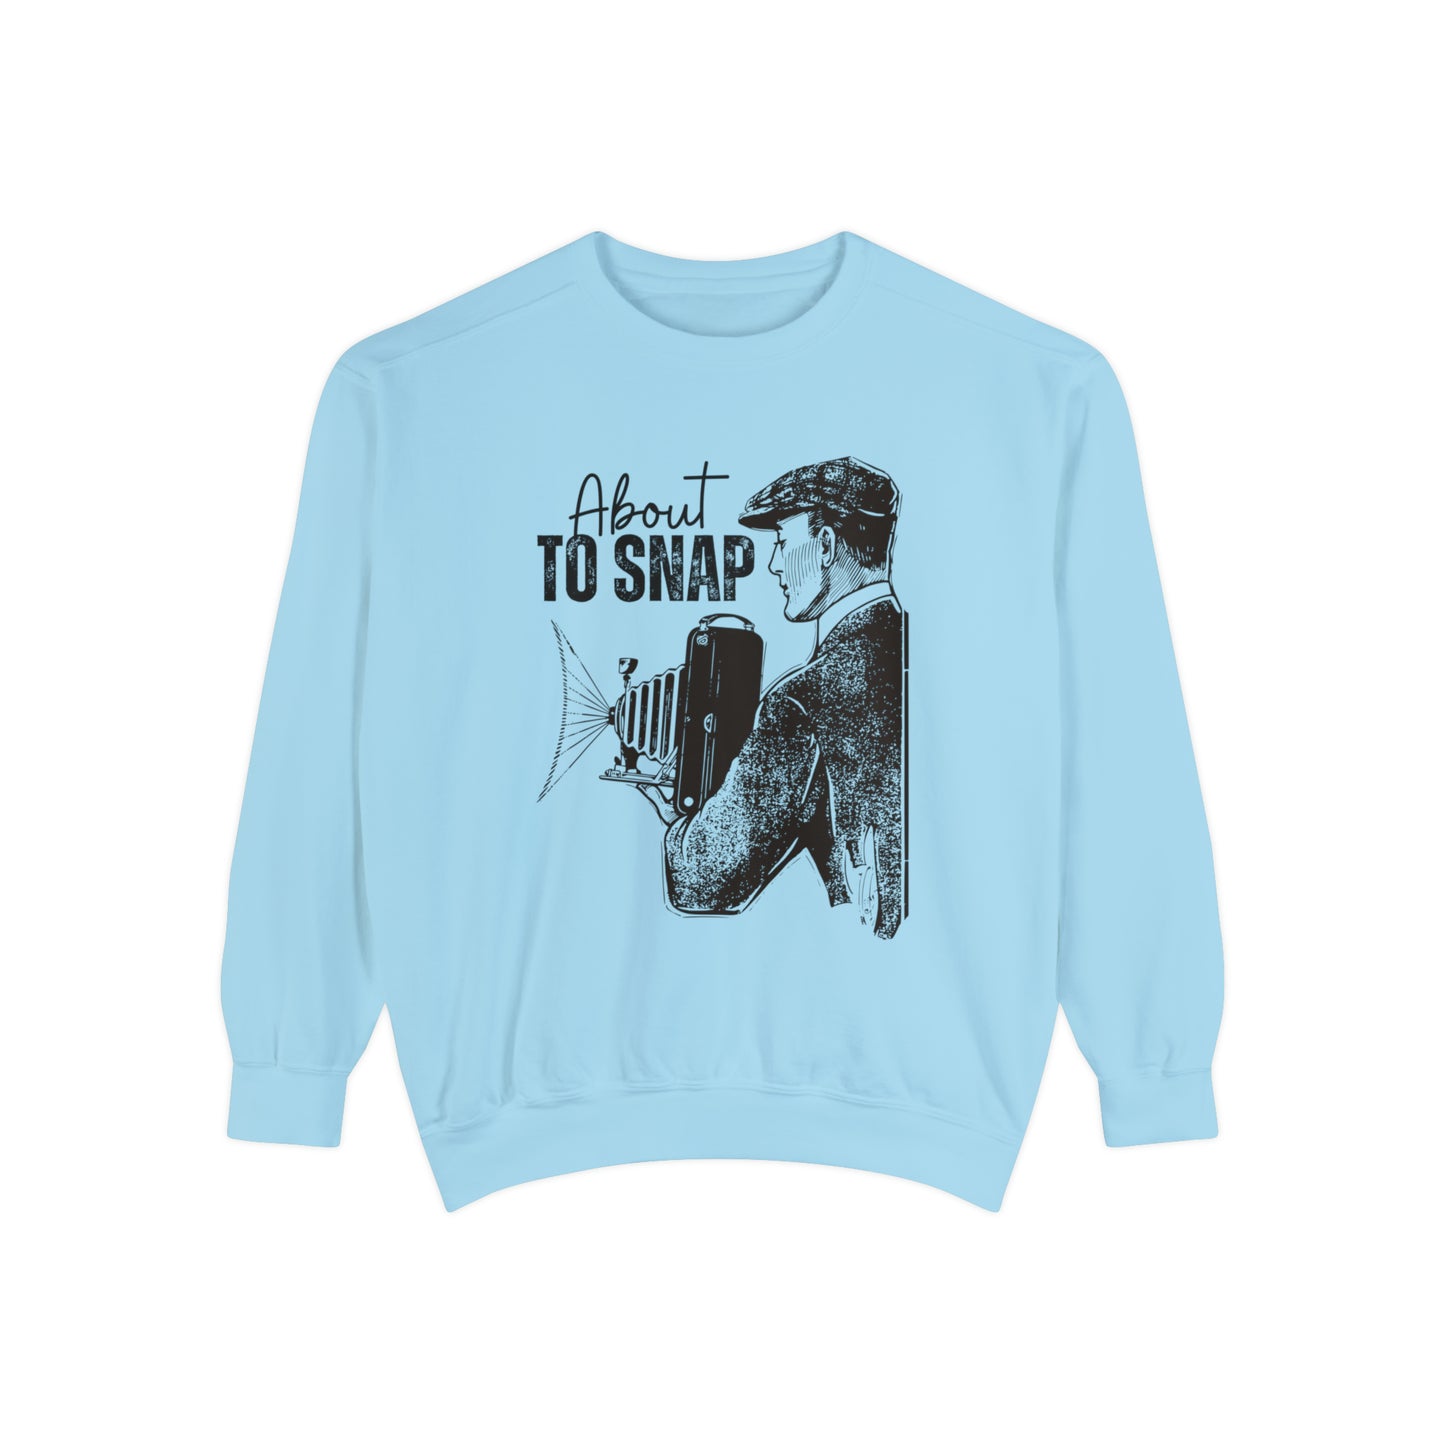 About to Snap Comfort Colors Sweatshirt - Eddy and Rita